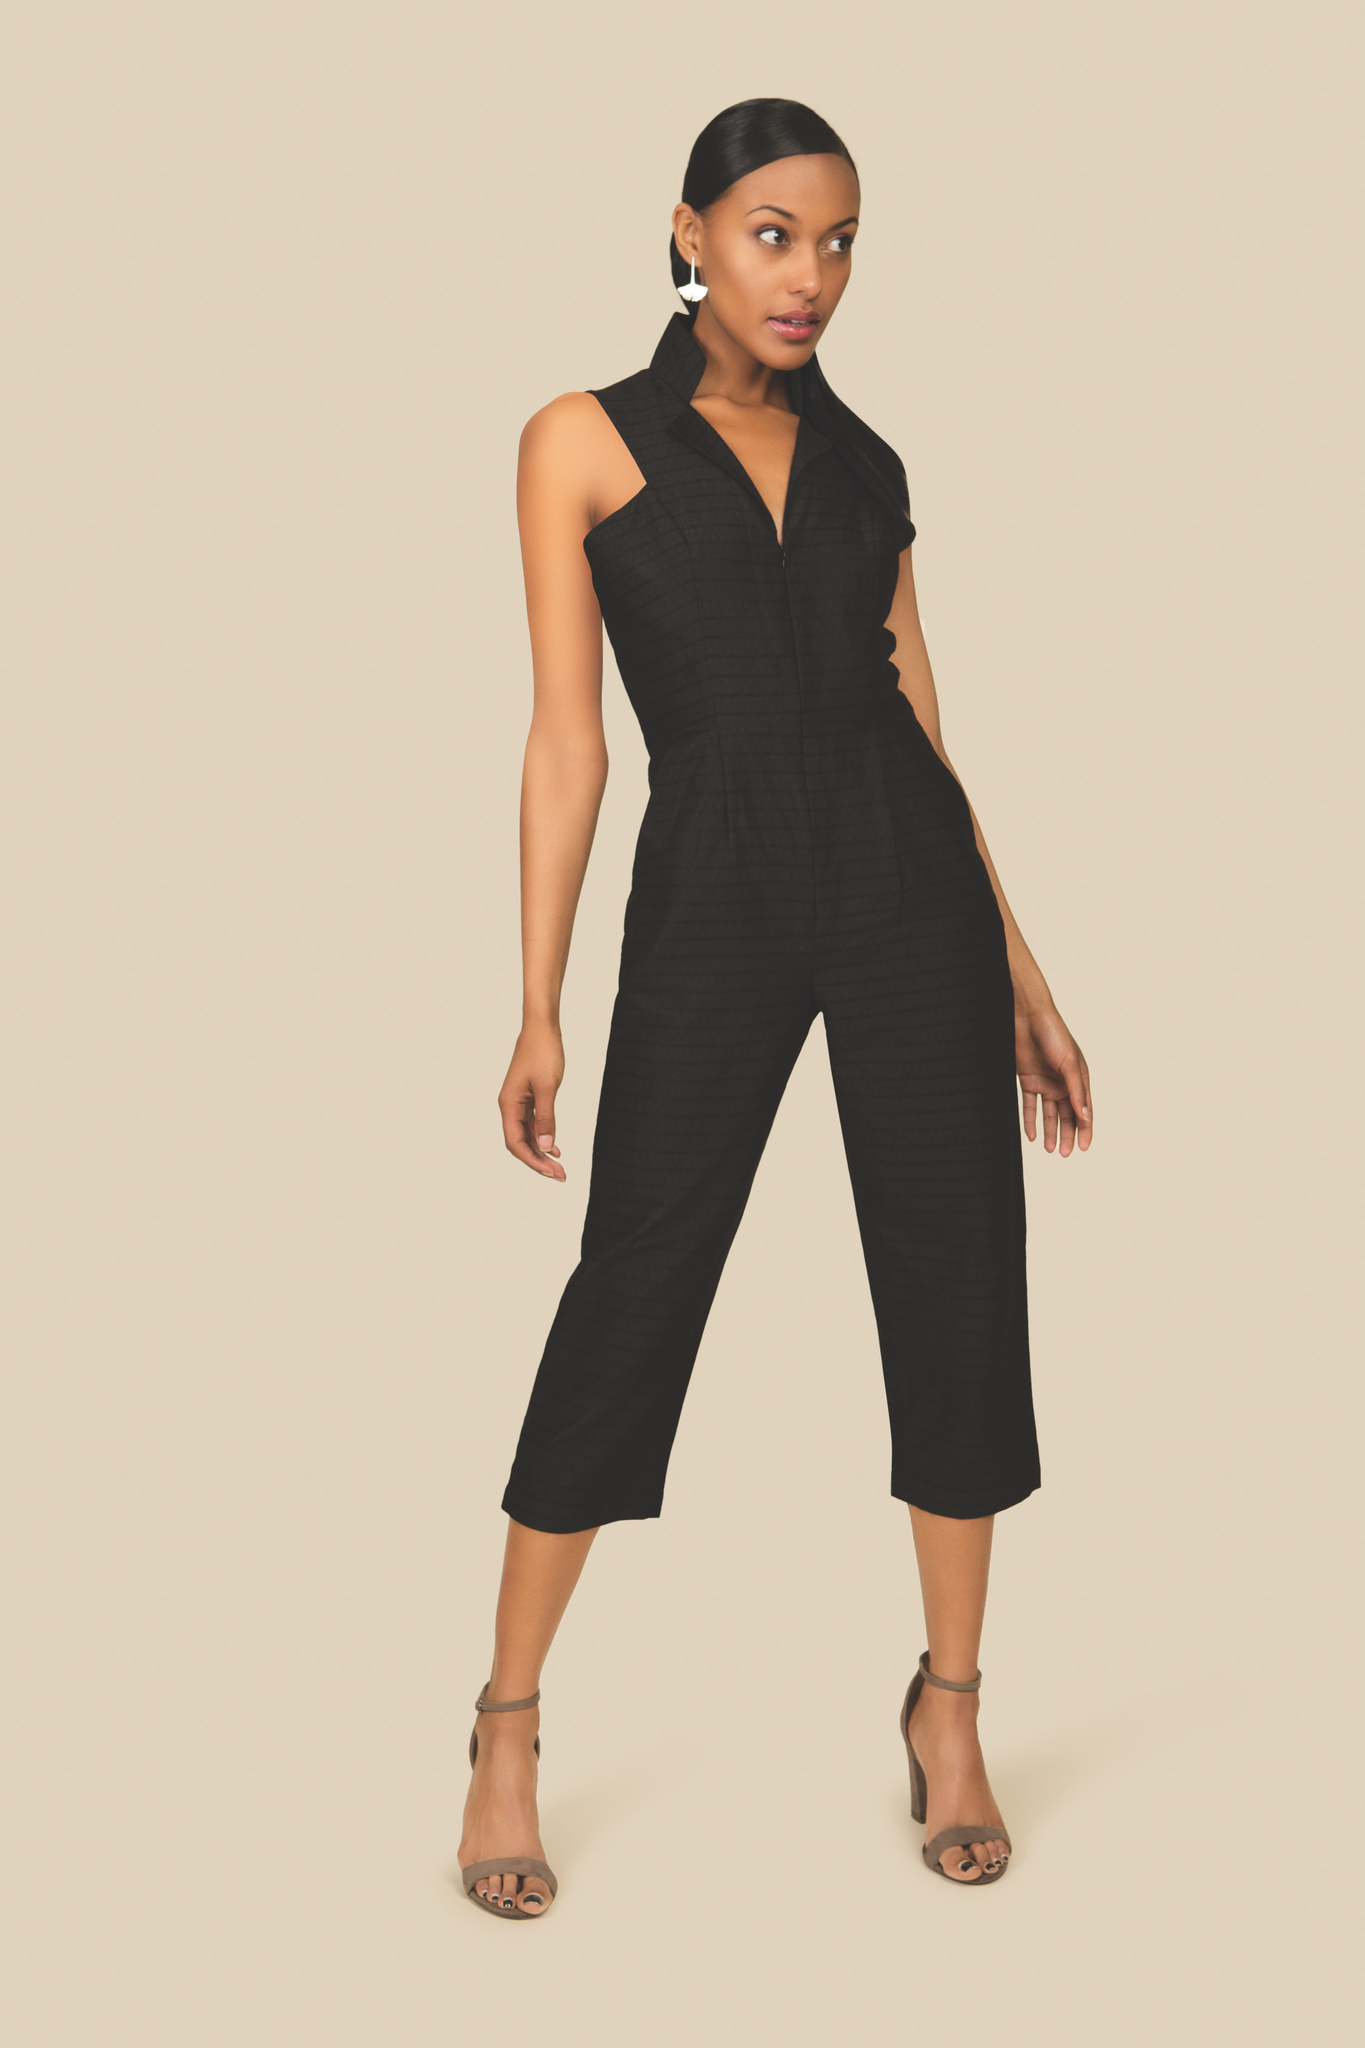 All Day Black Cotton Jumpsuit with Front Zipper - AGAATI